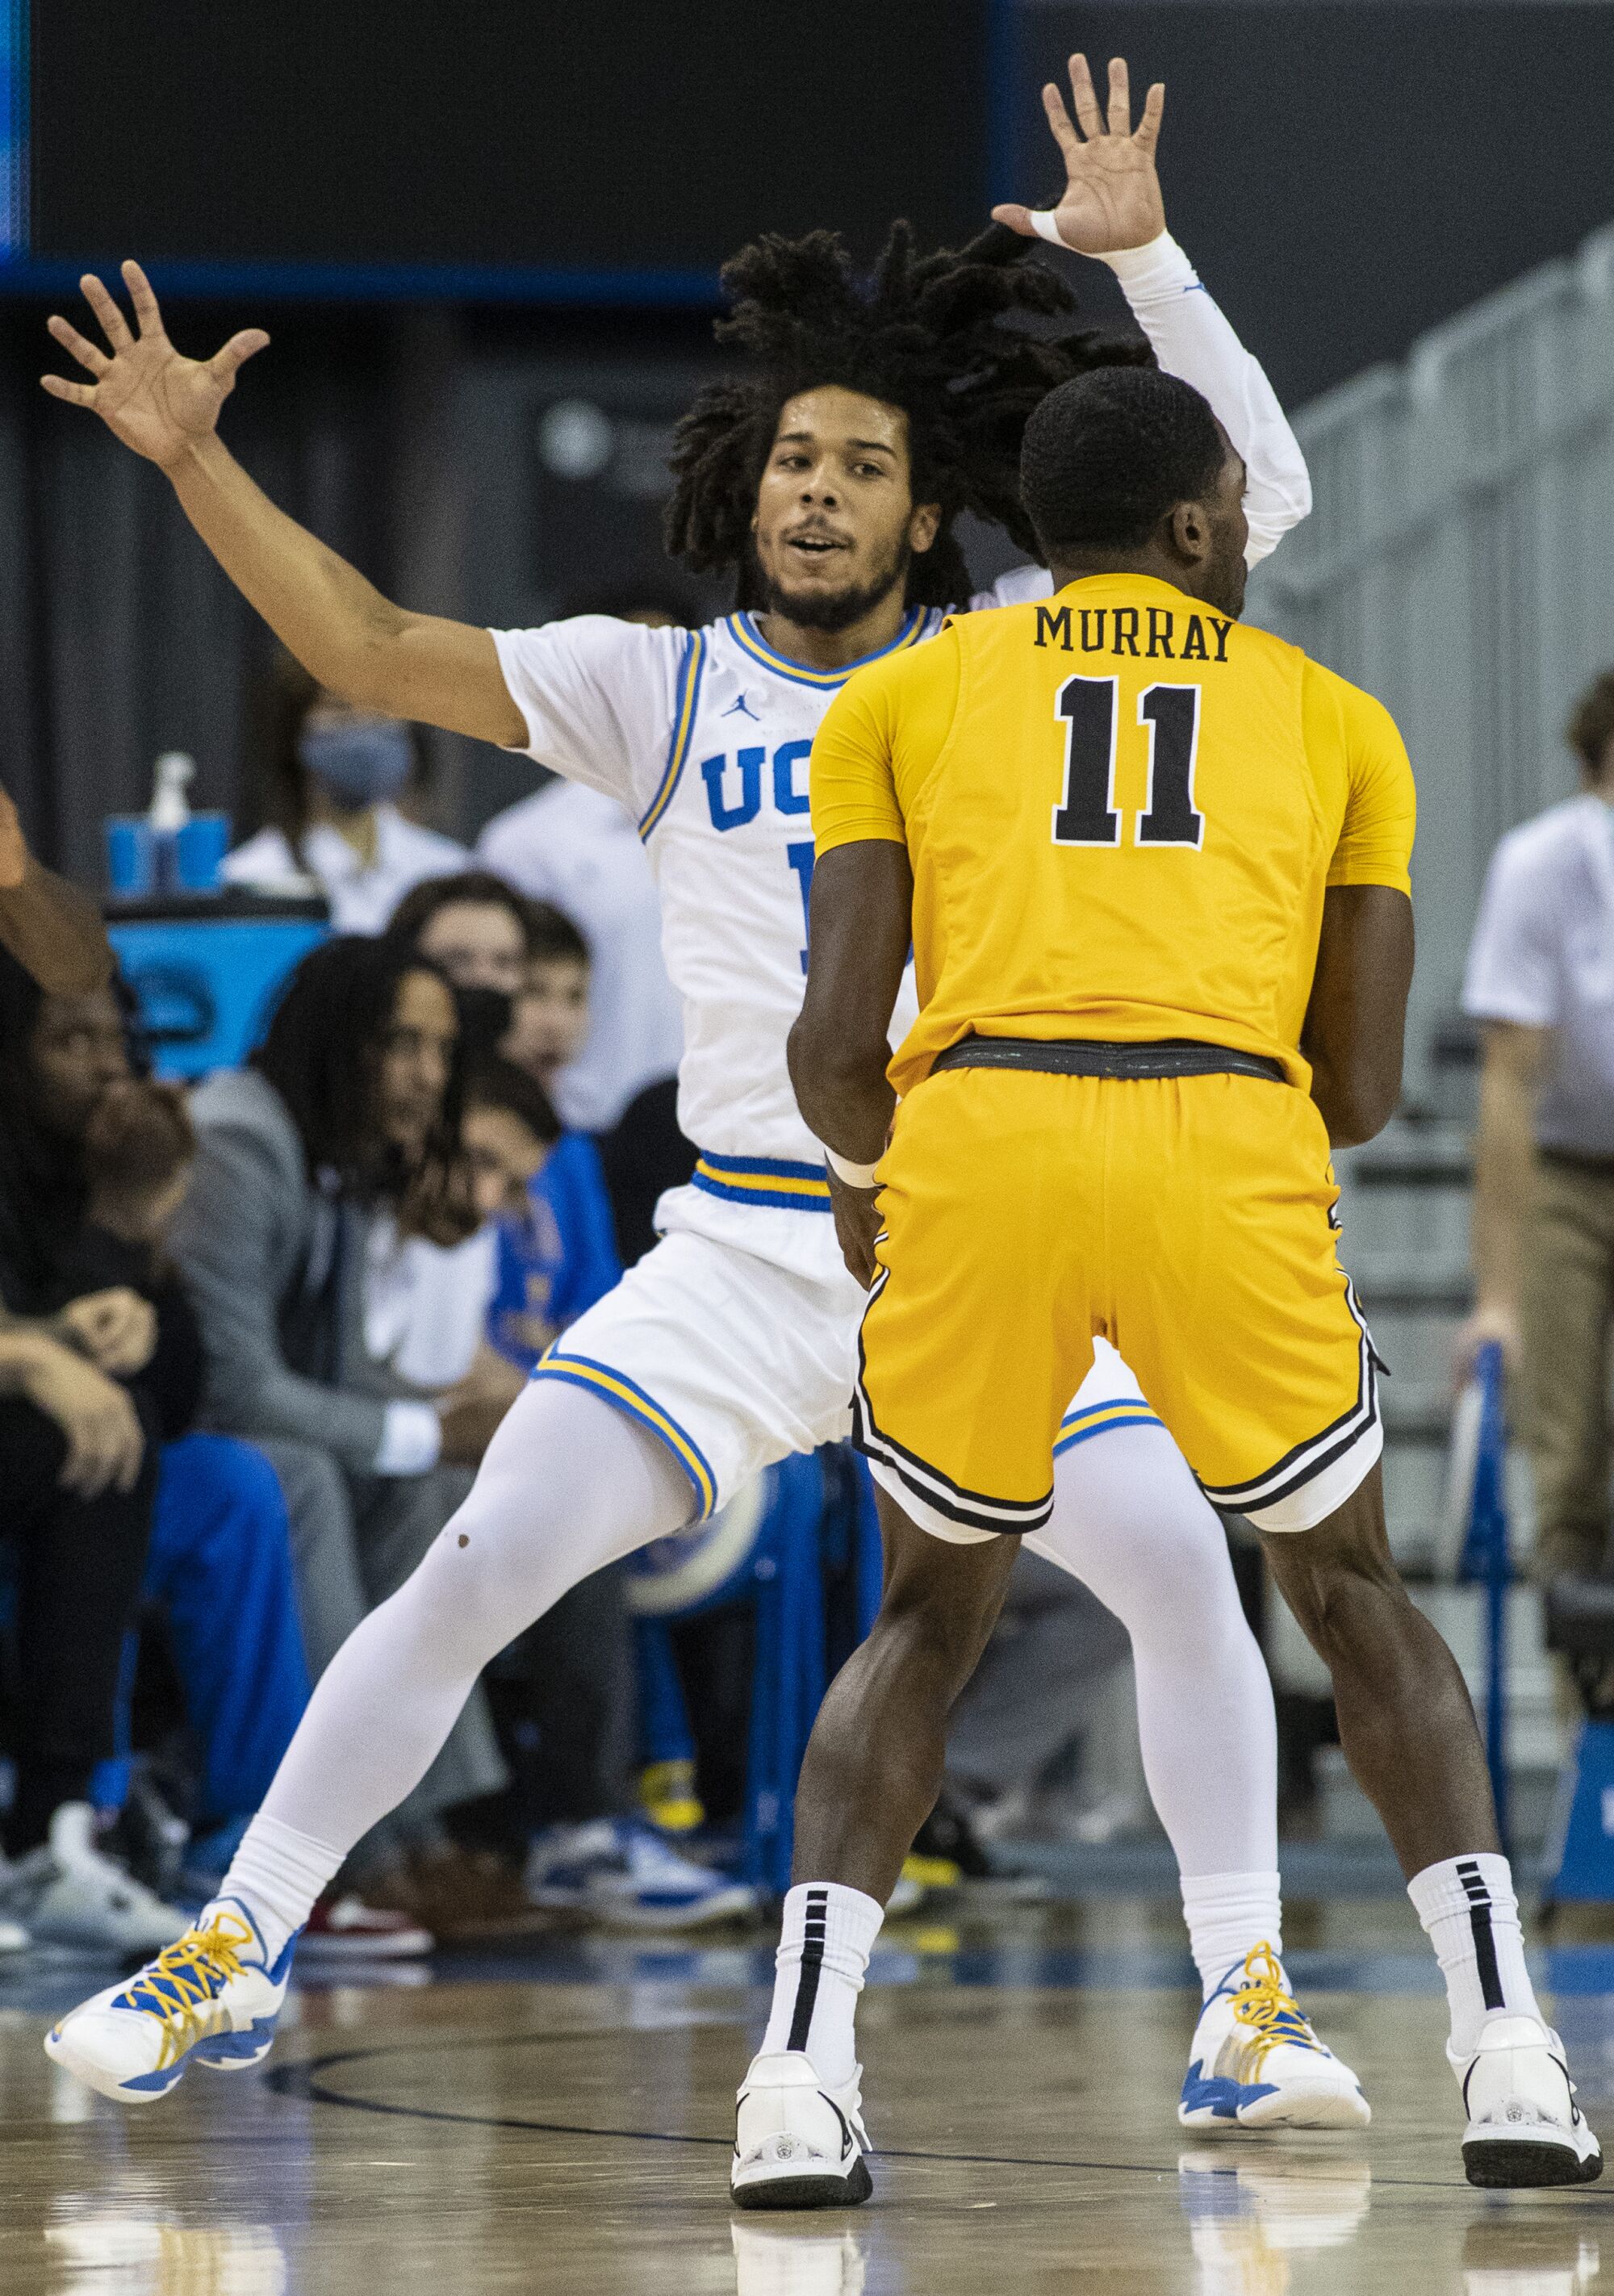 Tyger Campbell guards Long Beach State's Joel Murray on Jan. 6 at Pauley Pavilion.